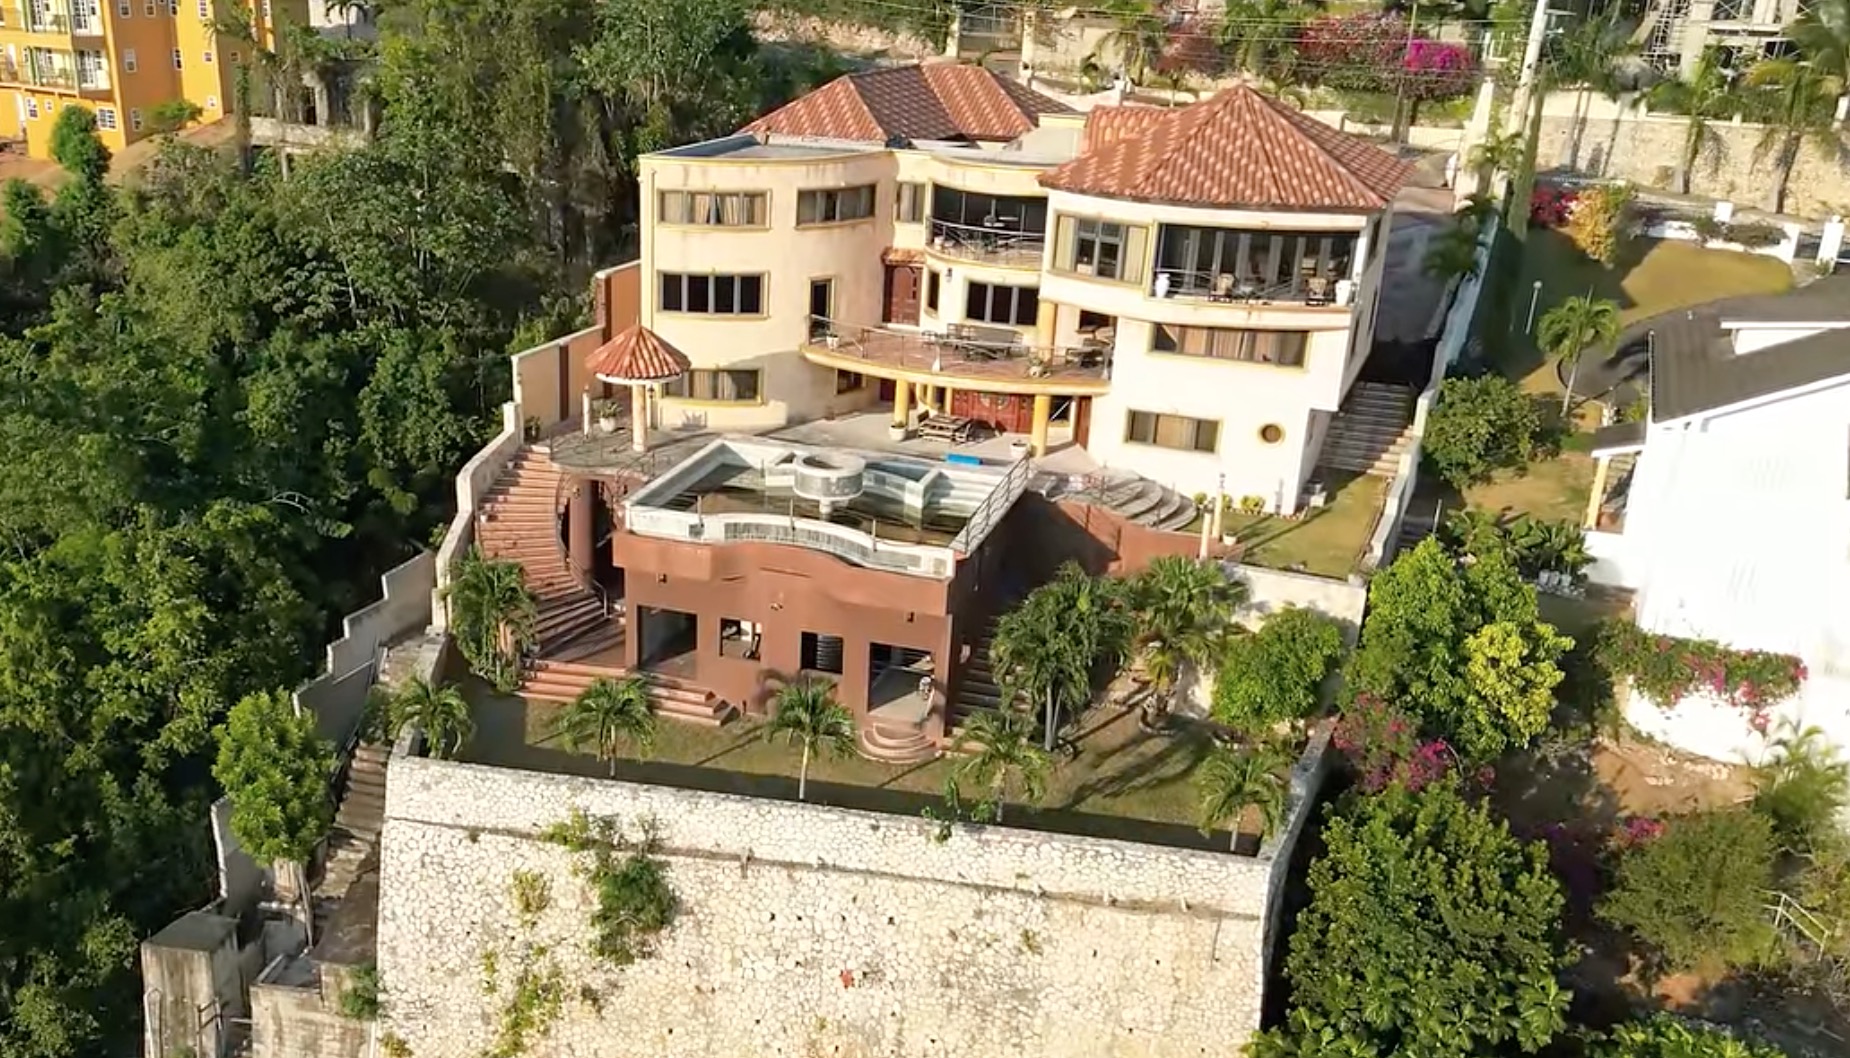 Mavado's Mansion and Others in Norbrook Aerial View via Drone - Watch Video